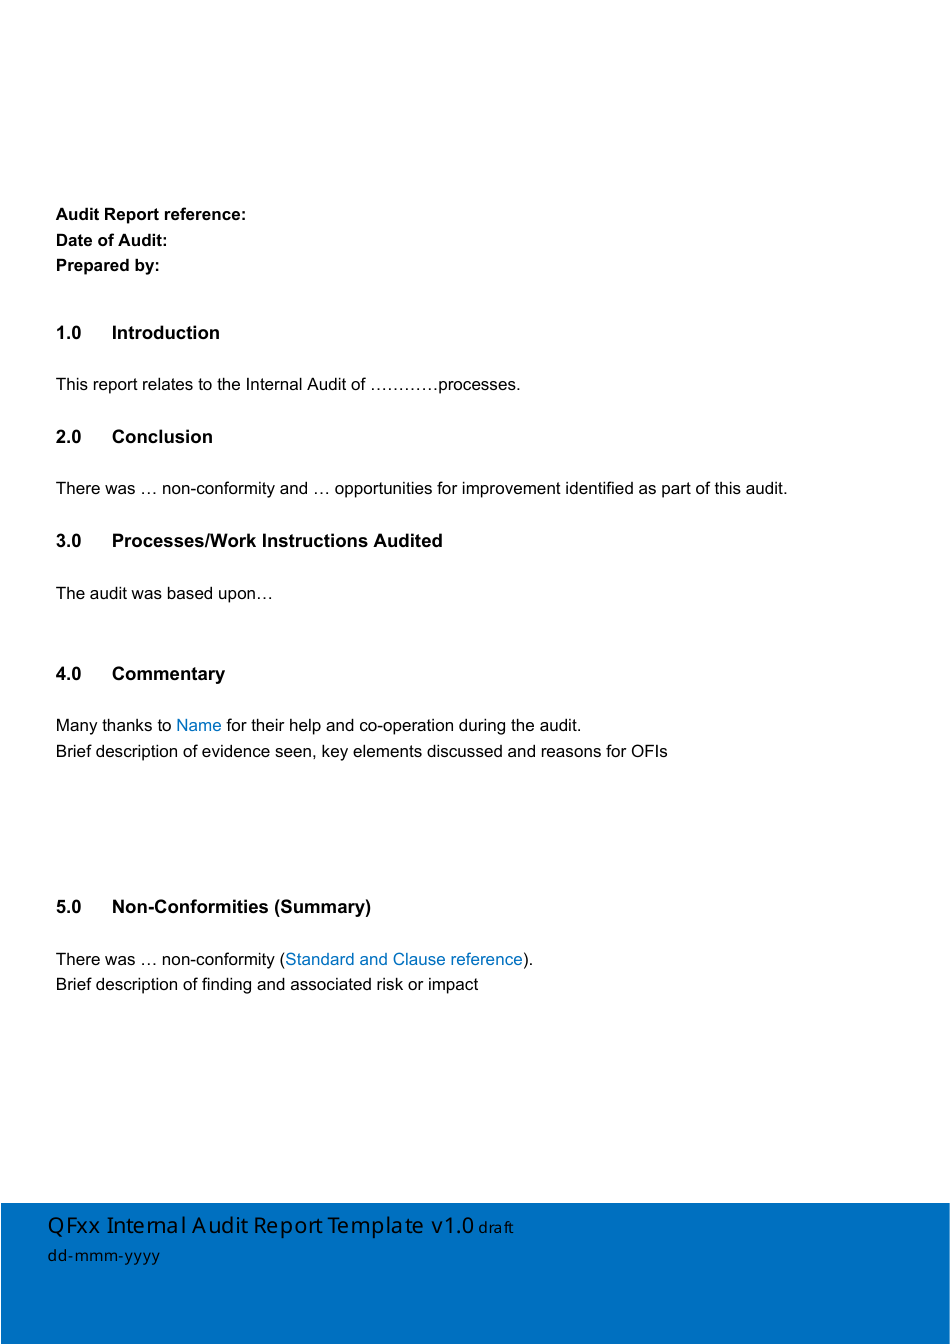 Internal Audit Report Template, Page 1